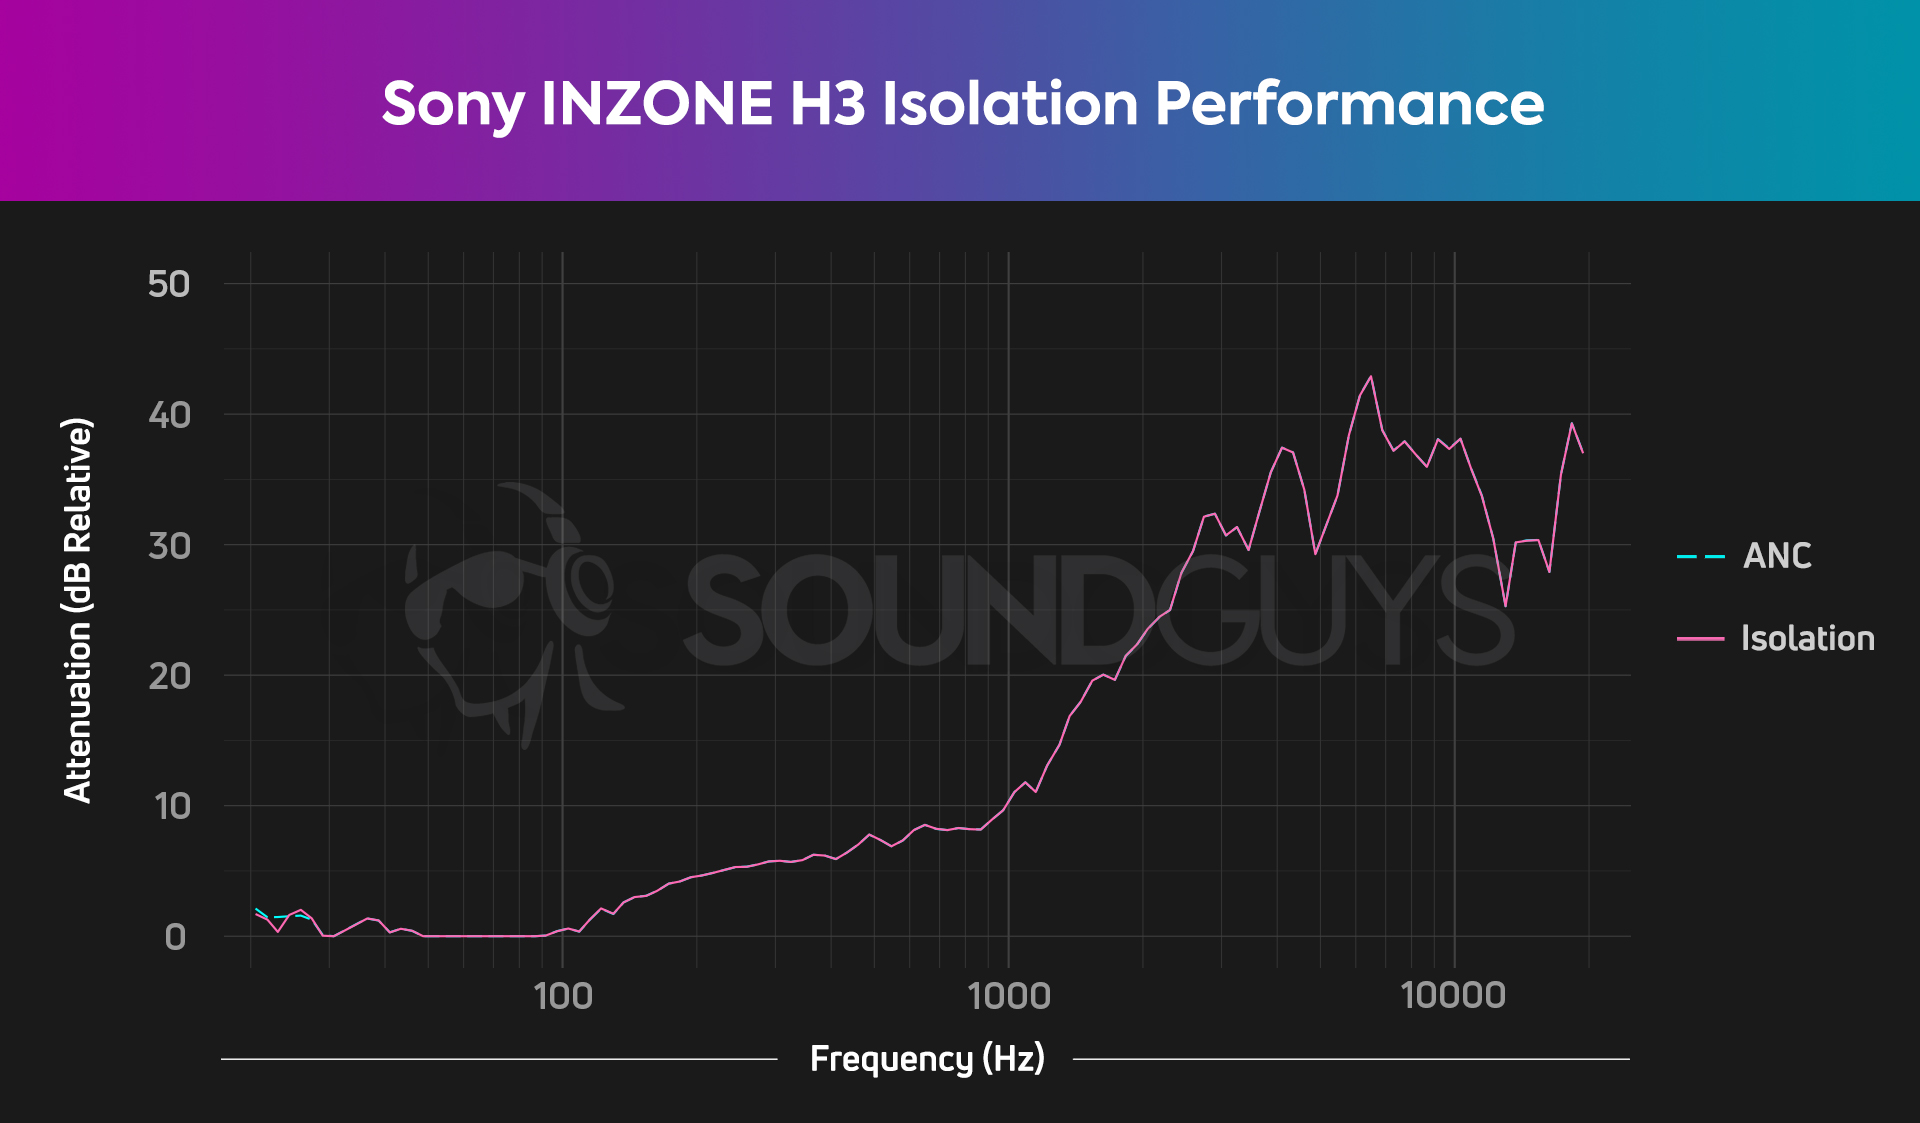 The Sony INZONE H3 isolation chart showing generally acceptable isolation performance.